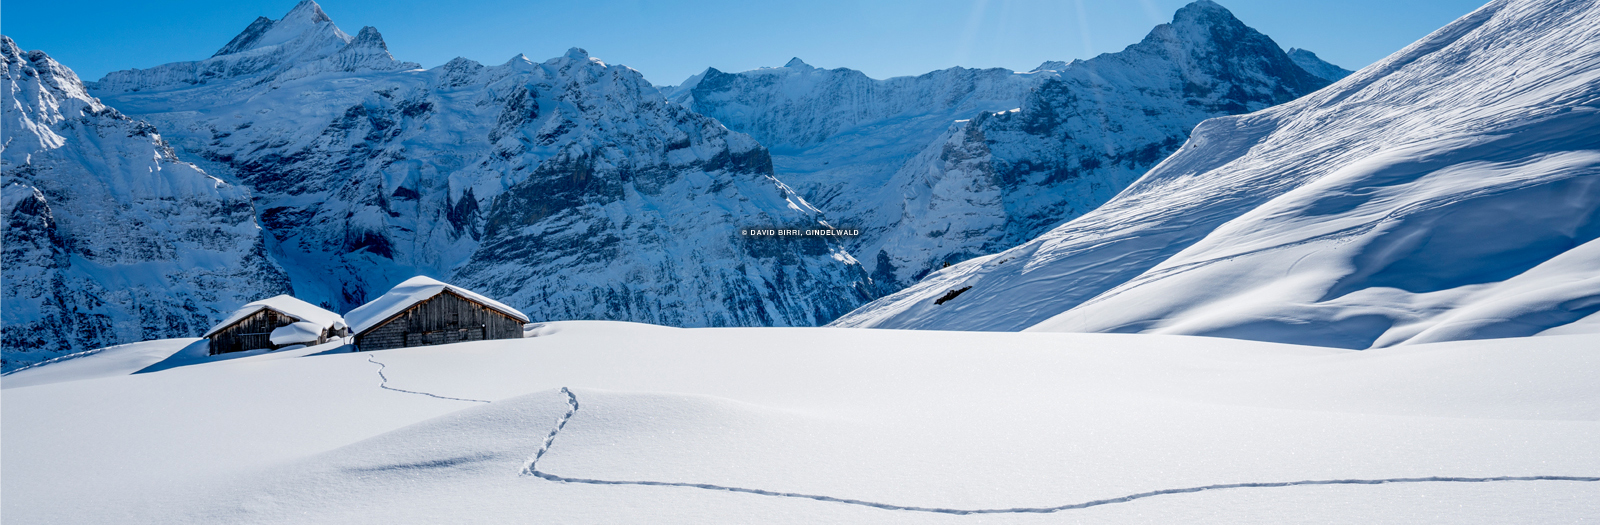 Discount Grindelwald Lift Tickets